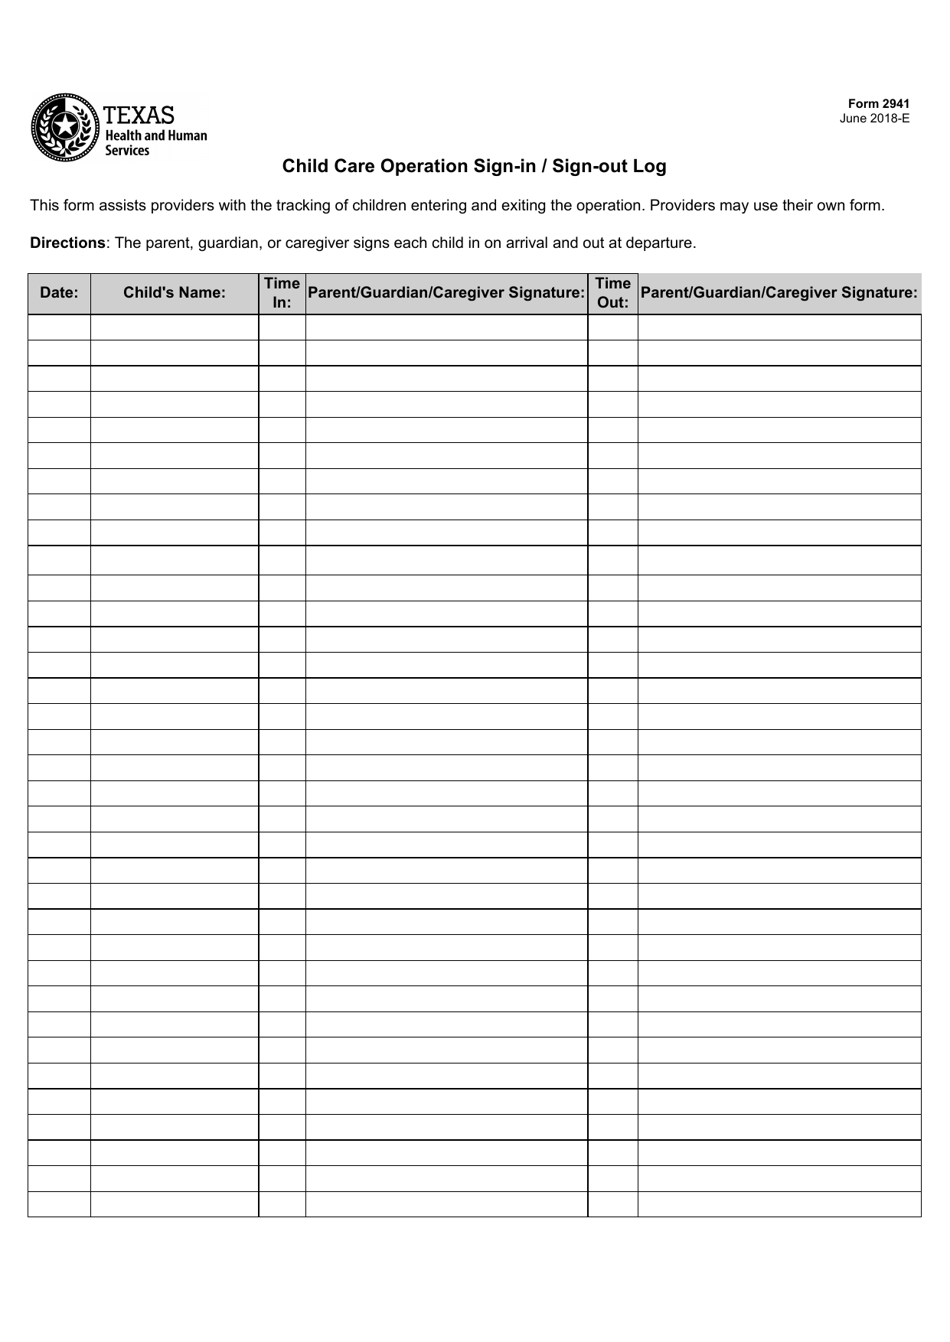 Form 2941 Child Care Operation Sign-In / Sign-Out Log - Texas, Page 1